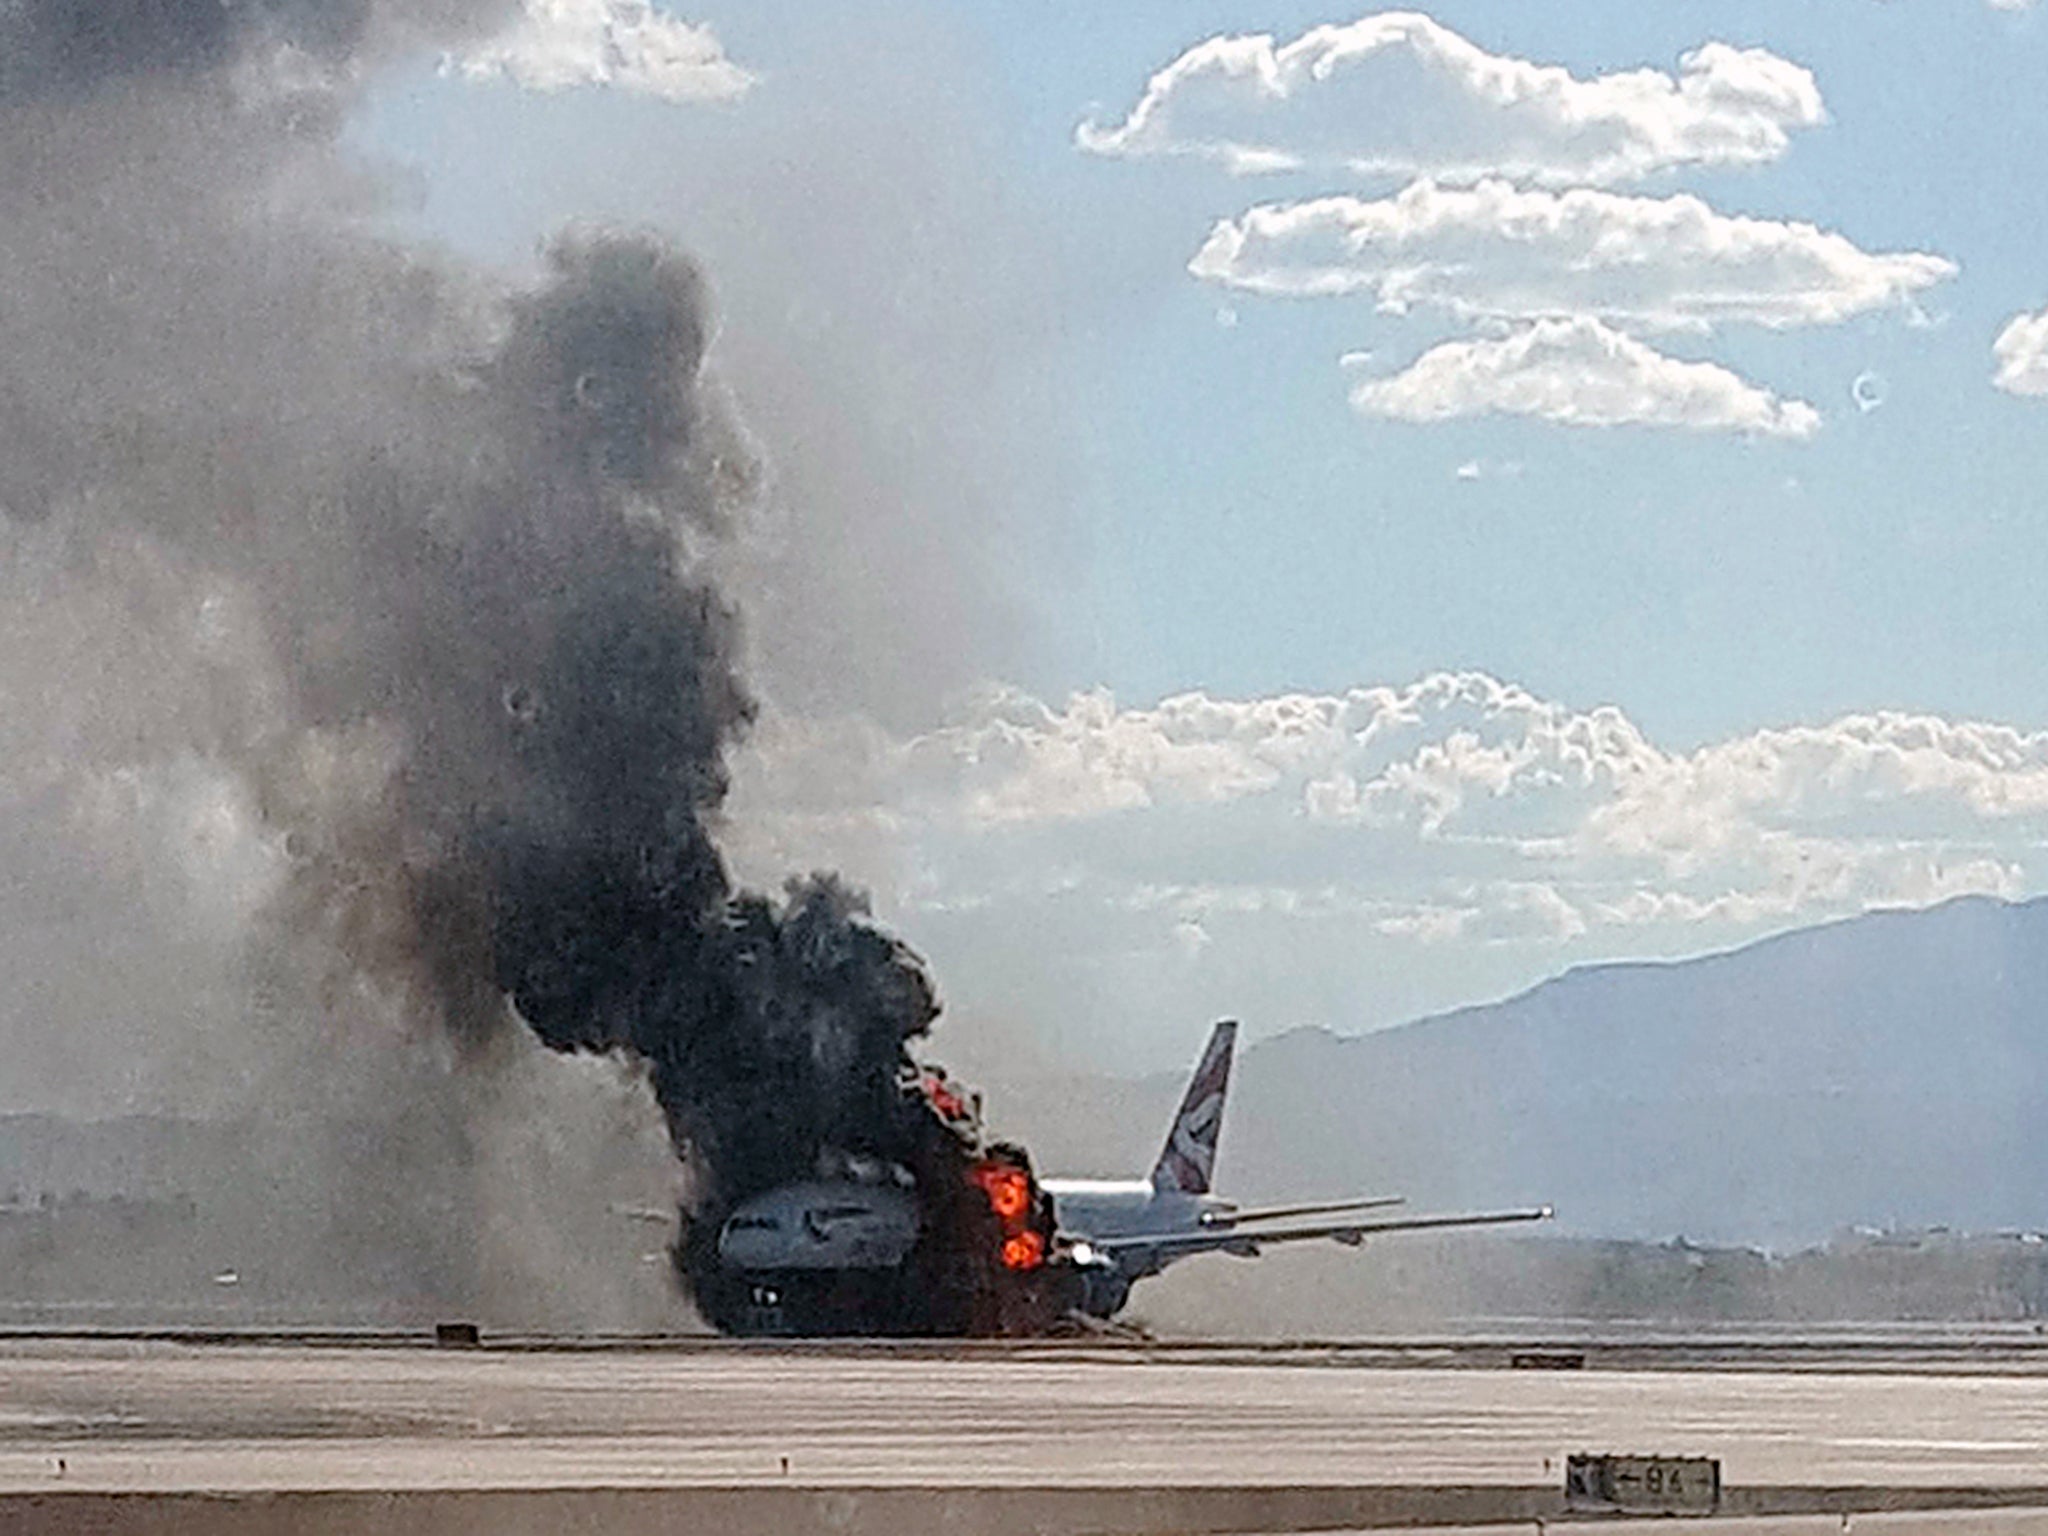 Smoke billows out from a plane that caught fire at McCarren International Airport, Nevada